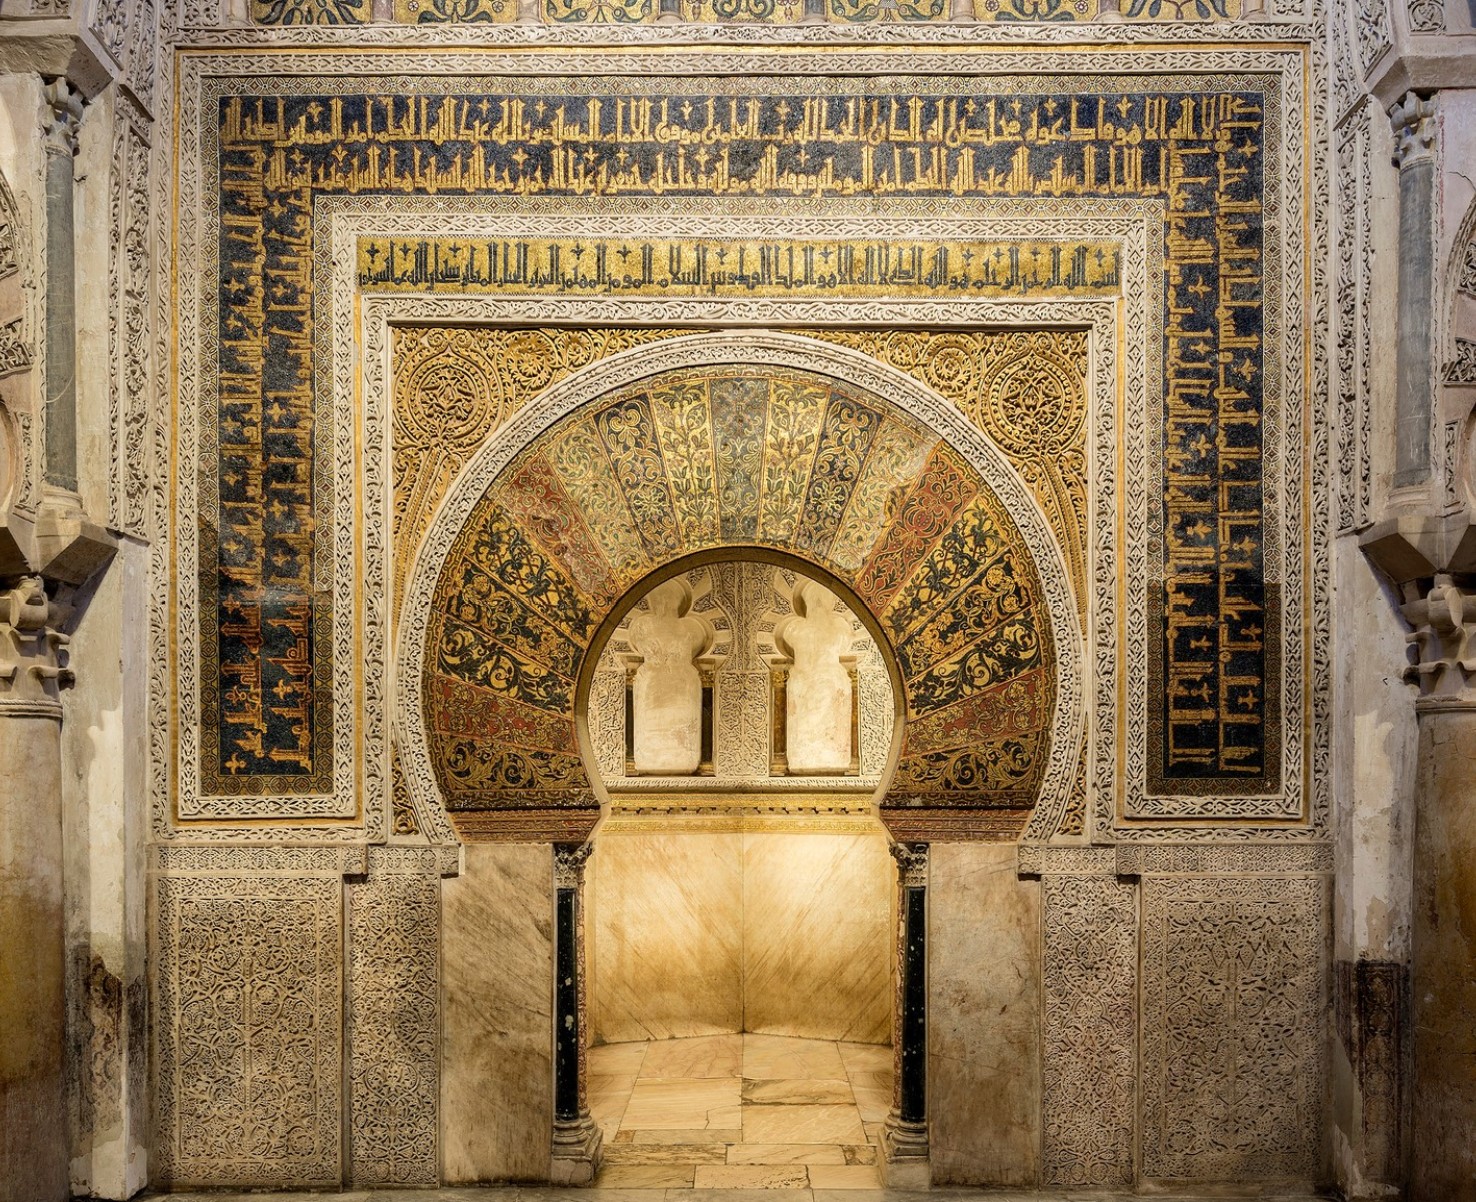 The focal point in the prayer hall is the horseshoe arched mihrab or prayer niche. A mihrab is used in a mosque to identify the wall that faces Mecca